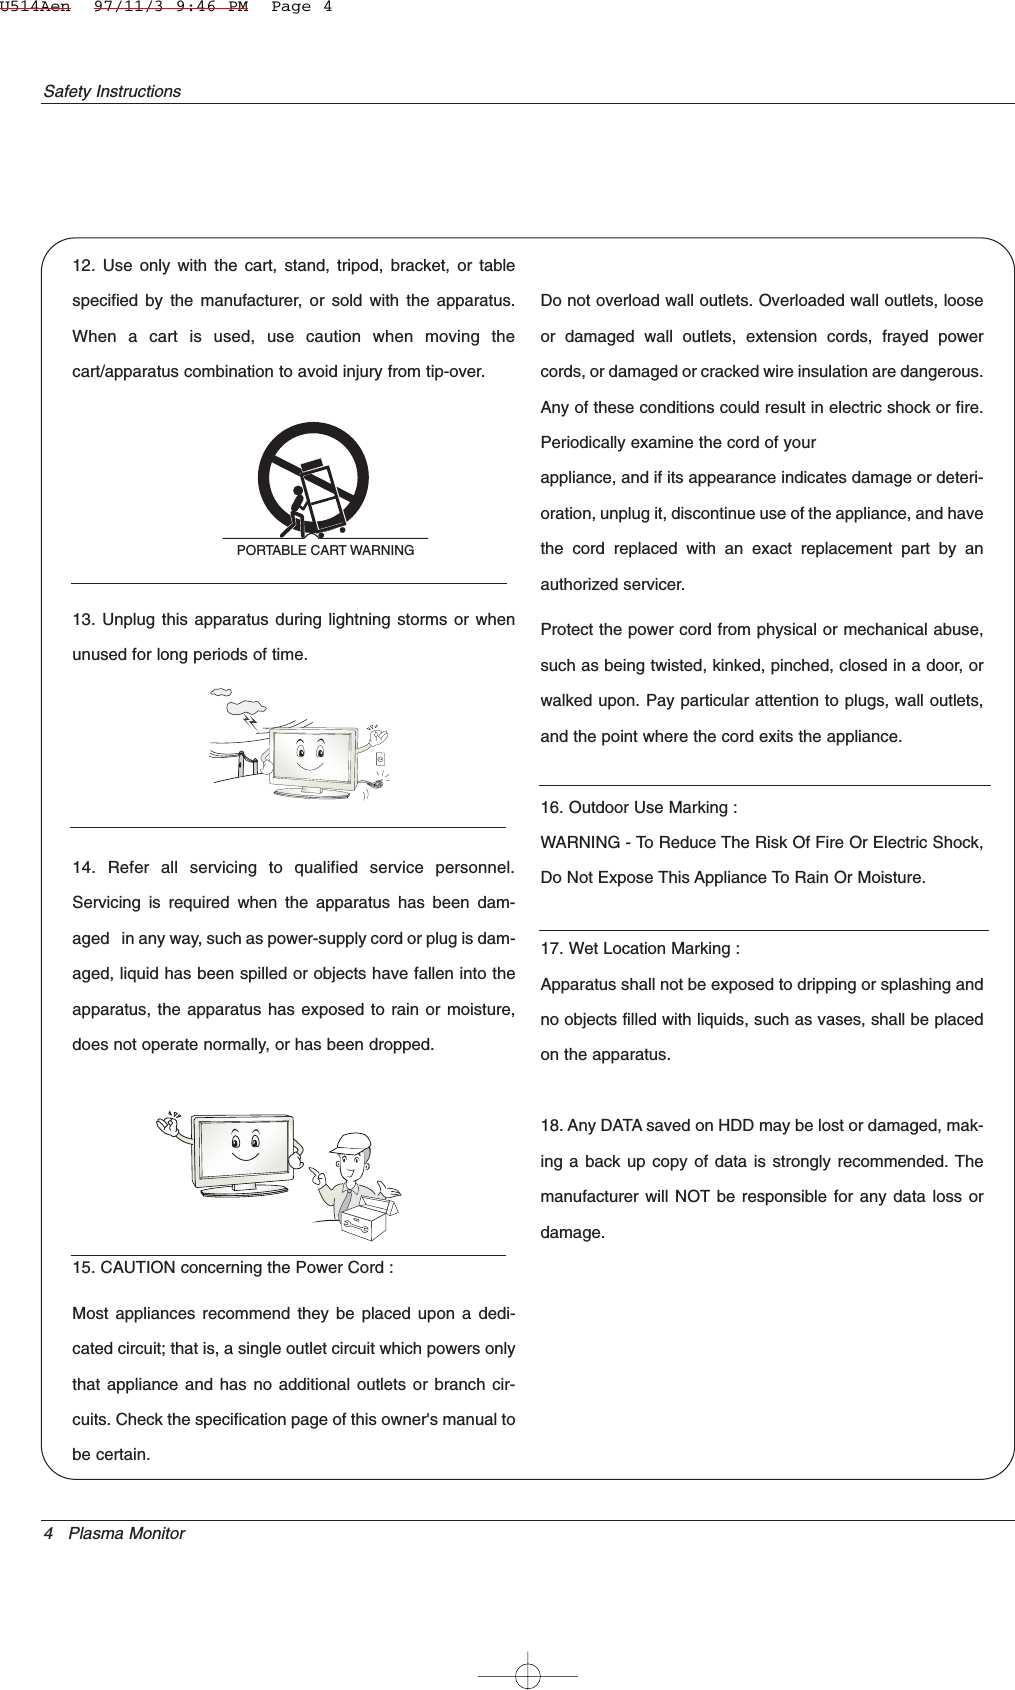 4 Plasma MonitorSafety Instructions12. Use only with the cart, stand, tripod, bracket, or tablespecified by the manufacturer, or sold with the apparatus.When a cart is used, use caution when moving thecart/apparatus combination to avoid injury from tip-over.13. Unplug this apparatus during lightning storms or whenunused for long periods of time.14. Refer all servicing to qualified service personnel.Servicing is required when the apparatus has been dam-aged   in any way, such as power-supply cord or plug is dam-aged, liquid has been spilled or objects have fallen into theapparatus, the apparatus has exposed to rain or moisture,does not operate normally, or has been dropped.15. CAUTION concerning the Power Cord :Most appliances recommend they be placed upon a dedi-cated circuit; that is, a single outlet circuit which powers onlythat appliance and has no additional outlets or branch cir-cuits. Check the specification page of this owner&apos;s manual tobe certain.Do not overload wall outlets. Overloaded wall outlets, looseor damaged wall outlets, extension cords, frayed powercords, or damaged or cracked wire insulation are dangerous.Any of these conditions could result in electric shock or fire.Periodically examine the cord of yourappliance, and if its appearance indicates damage or deteri-oration, unplug it, discontinue use of the appliance, and havethe cord replaced with an exact replacement part by anauthorized servicer.Protect the power cord from physical or mechanical abuse,such as being twisted, kinked, pinched, closed in a door, orwalked upon. Pay particular attention to plugs, wall outlets,and the point where the cord exits the appliance.16. Outdoor Use Marking :WARNING - To Reduce The Risk Of Fire Or Electric Shock,Do Not Expose This Appliance To Rain Or Moisture.17. Wet Location Marking :Apparatus shall not be exposed to dripping or splashing andno objects filled with liquids, such as vases, shall be placedon the apparatus.18. Any DATA saved on HDD may be lost or damaged, mak-ing a back up copy of data is strongly recommended. Themanufacturer will NOT be responsible for any data loss ordamage.PORTABLE CART WARNINGU514Aen  97/11/3 9:46 PM  Page 4